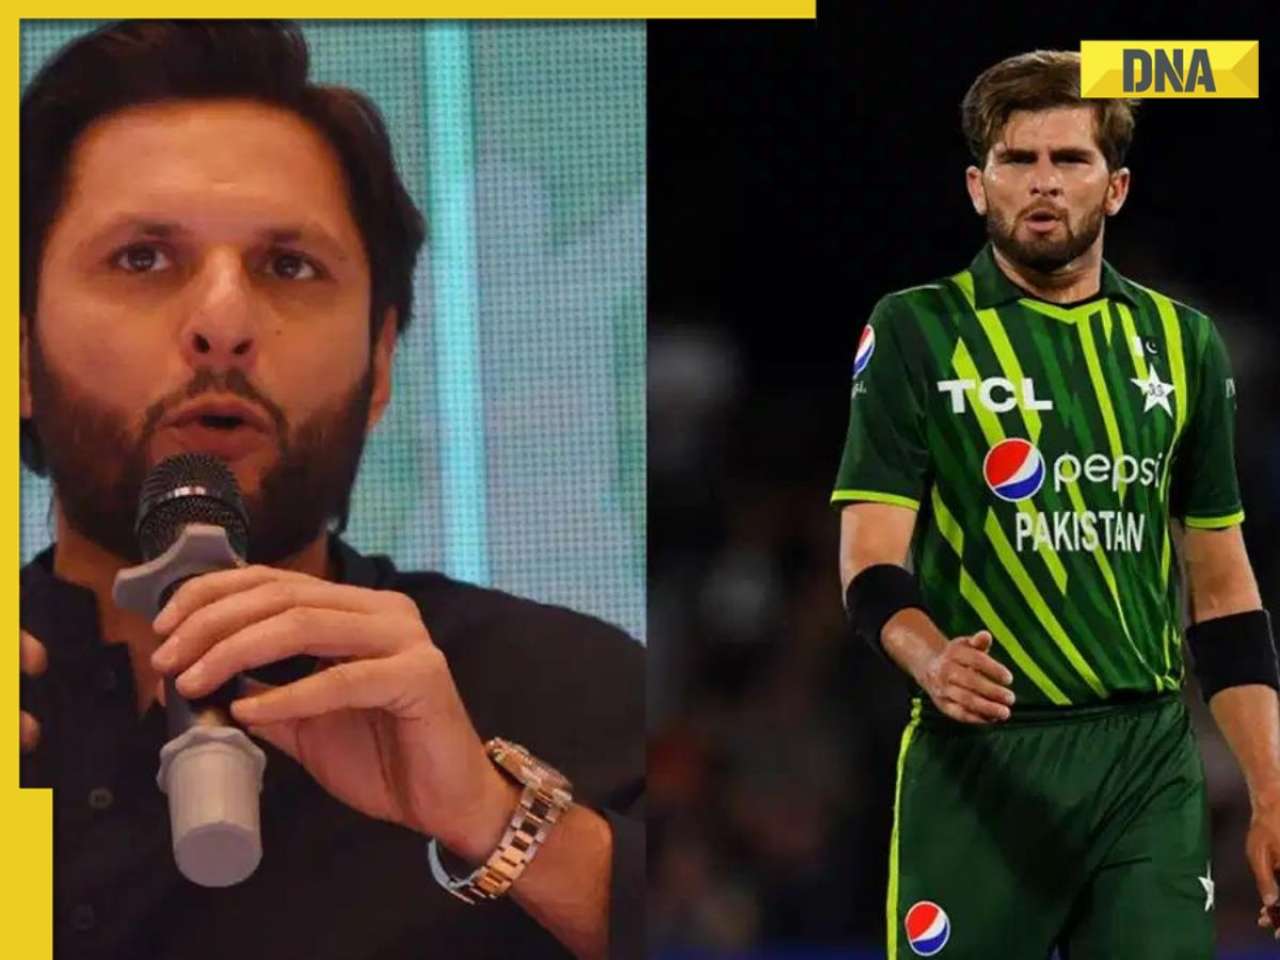 'If change was necessary...': Shahid Afridi reacts to Shaheen Afridi's sacking as Pakistan skipper